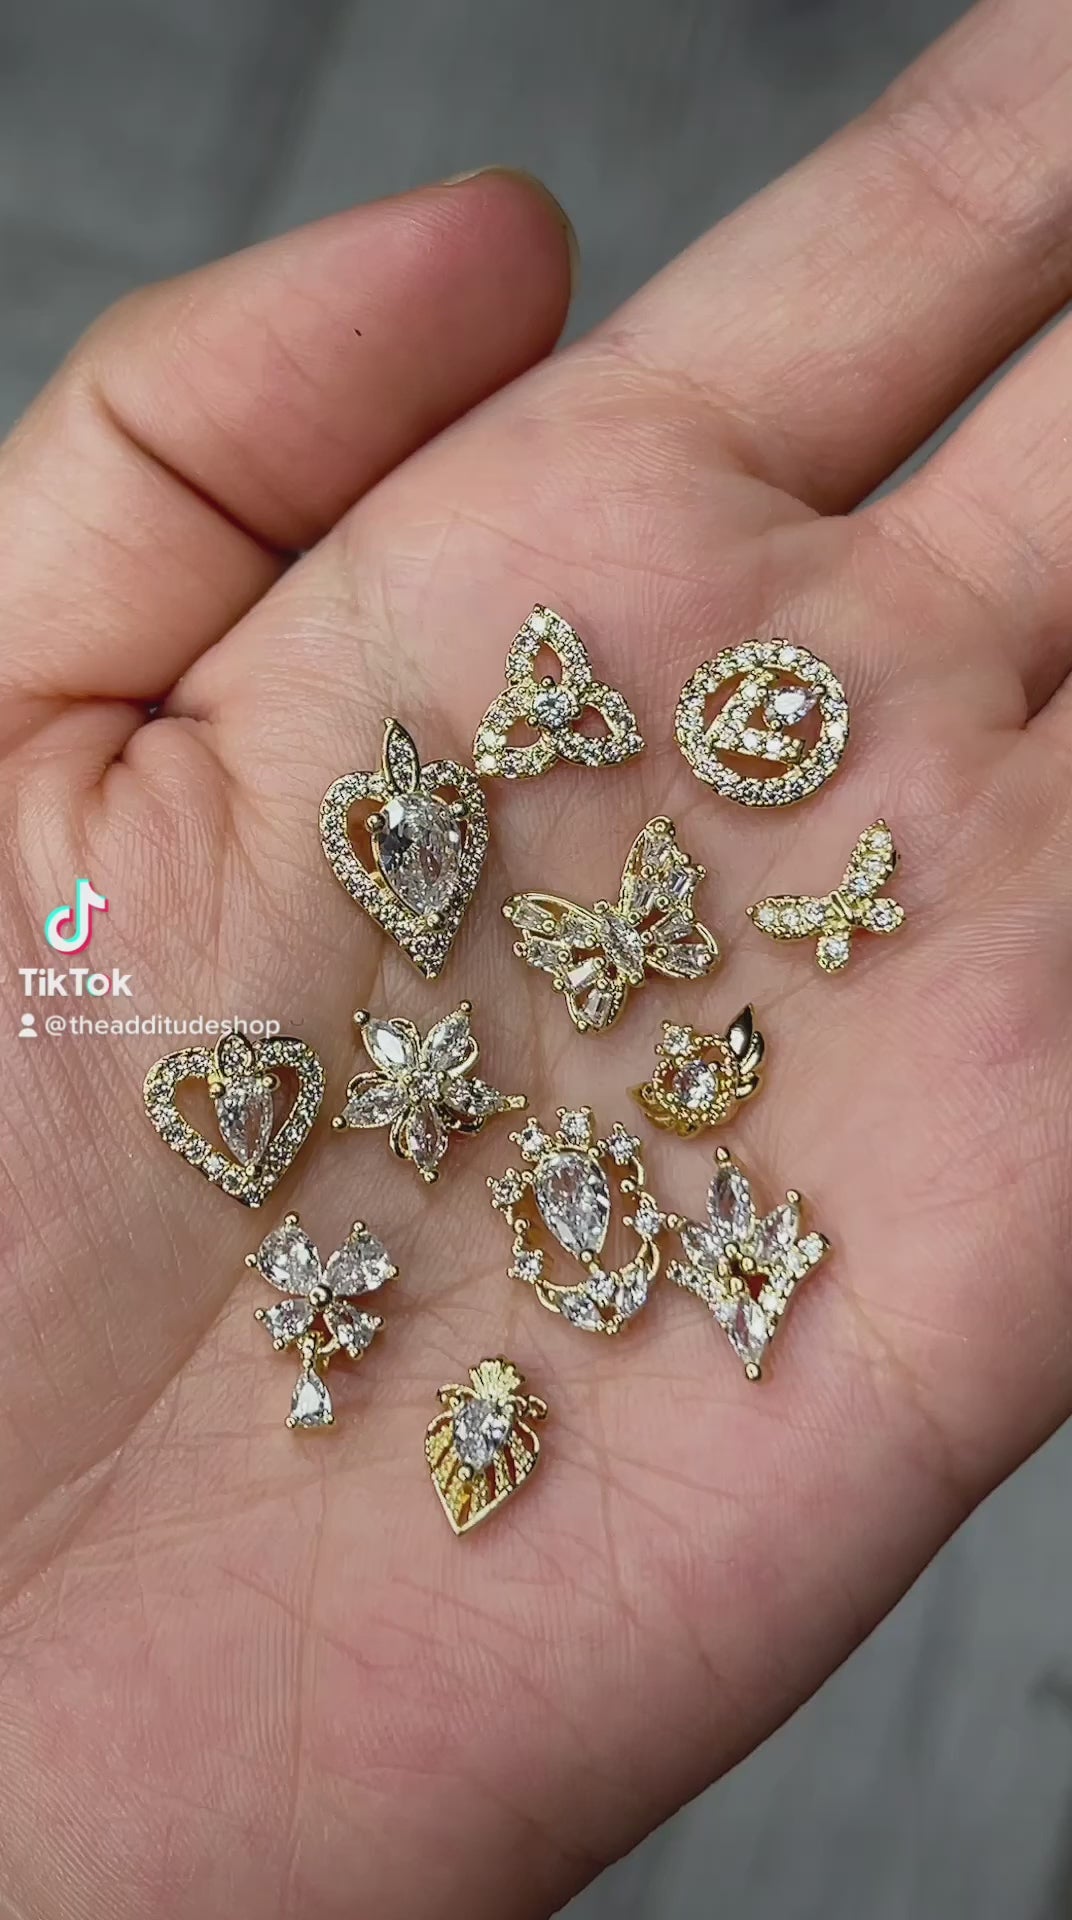 Dangling C Gold Zircon 3D Nail Charms (5 Pieces) – The Additude Shop